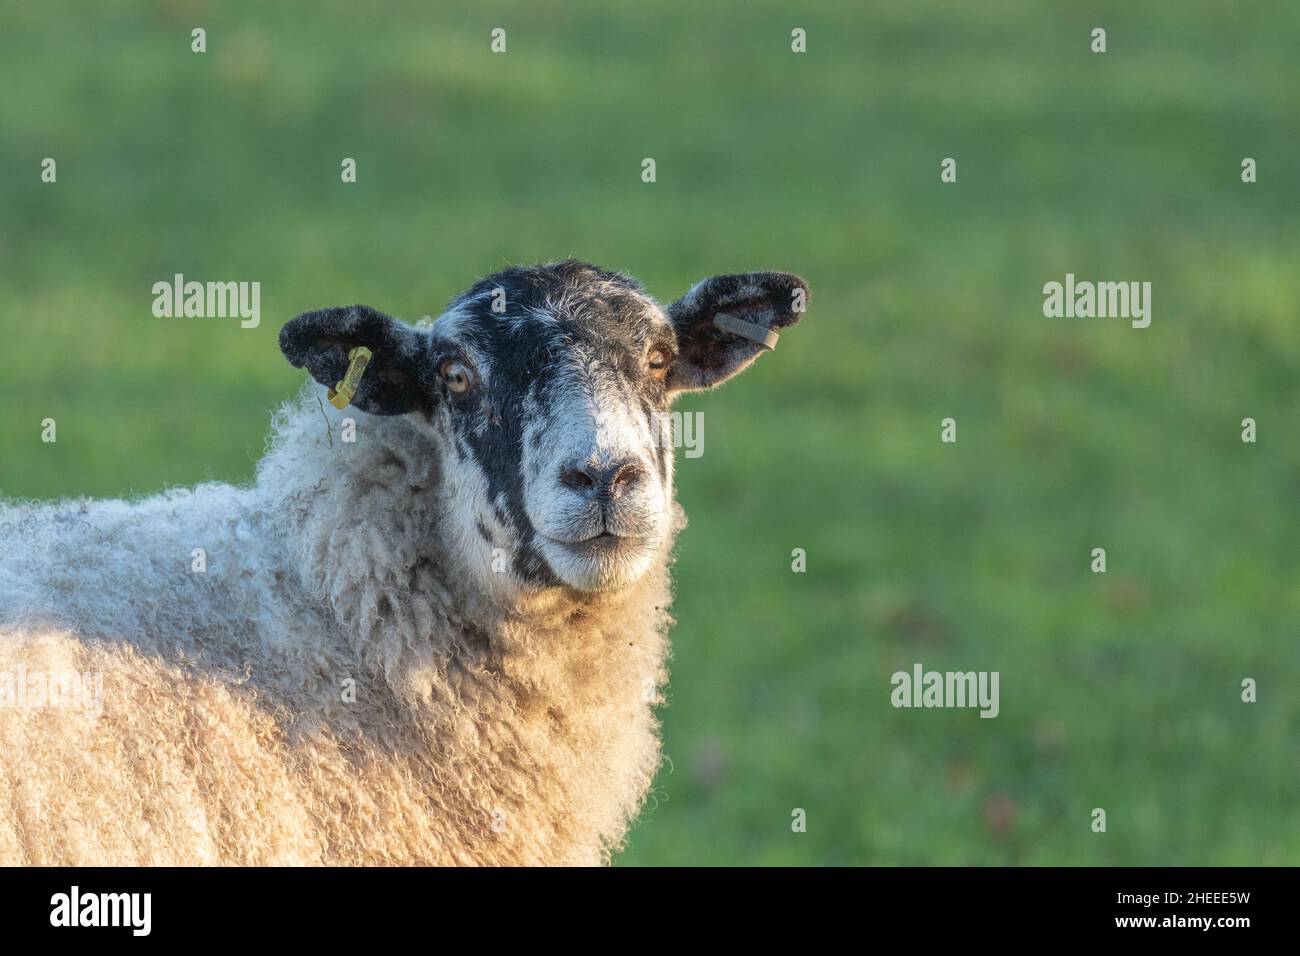 A sheep face showing ear tags. The tags are used for sheep identification. Stock Photo